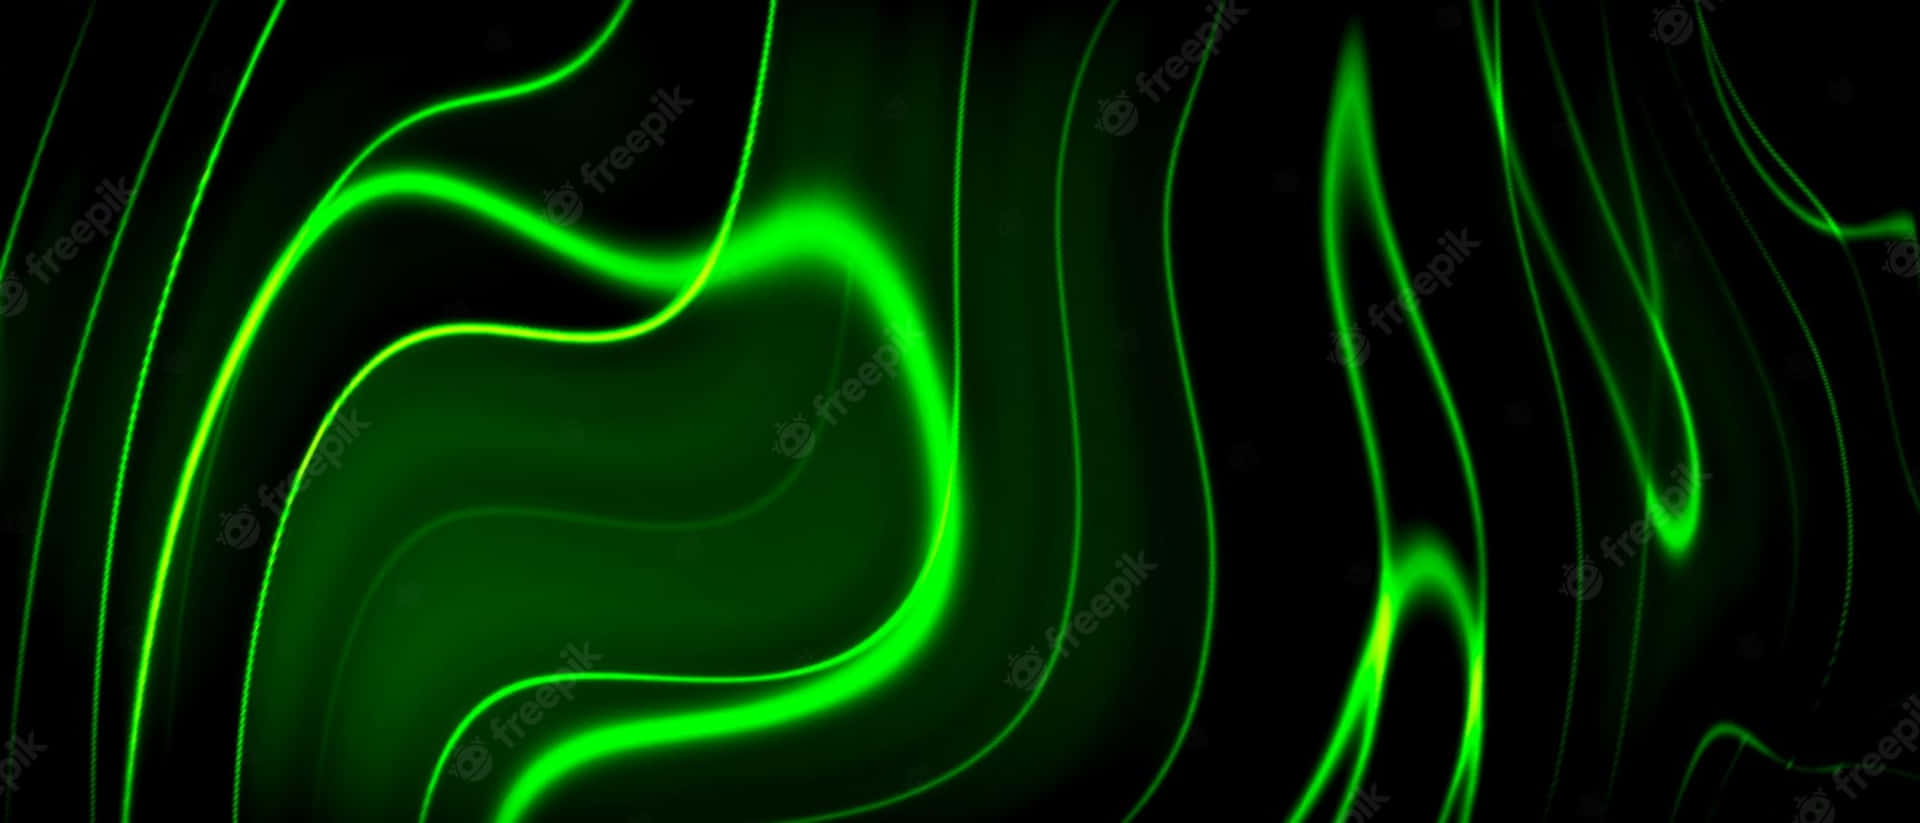 Green And Black Abstract Background Wallpaper